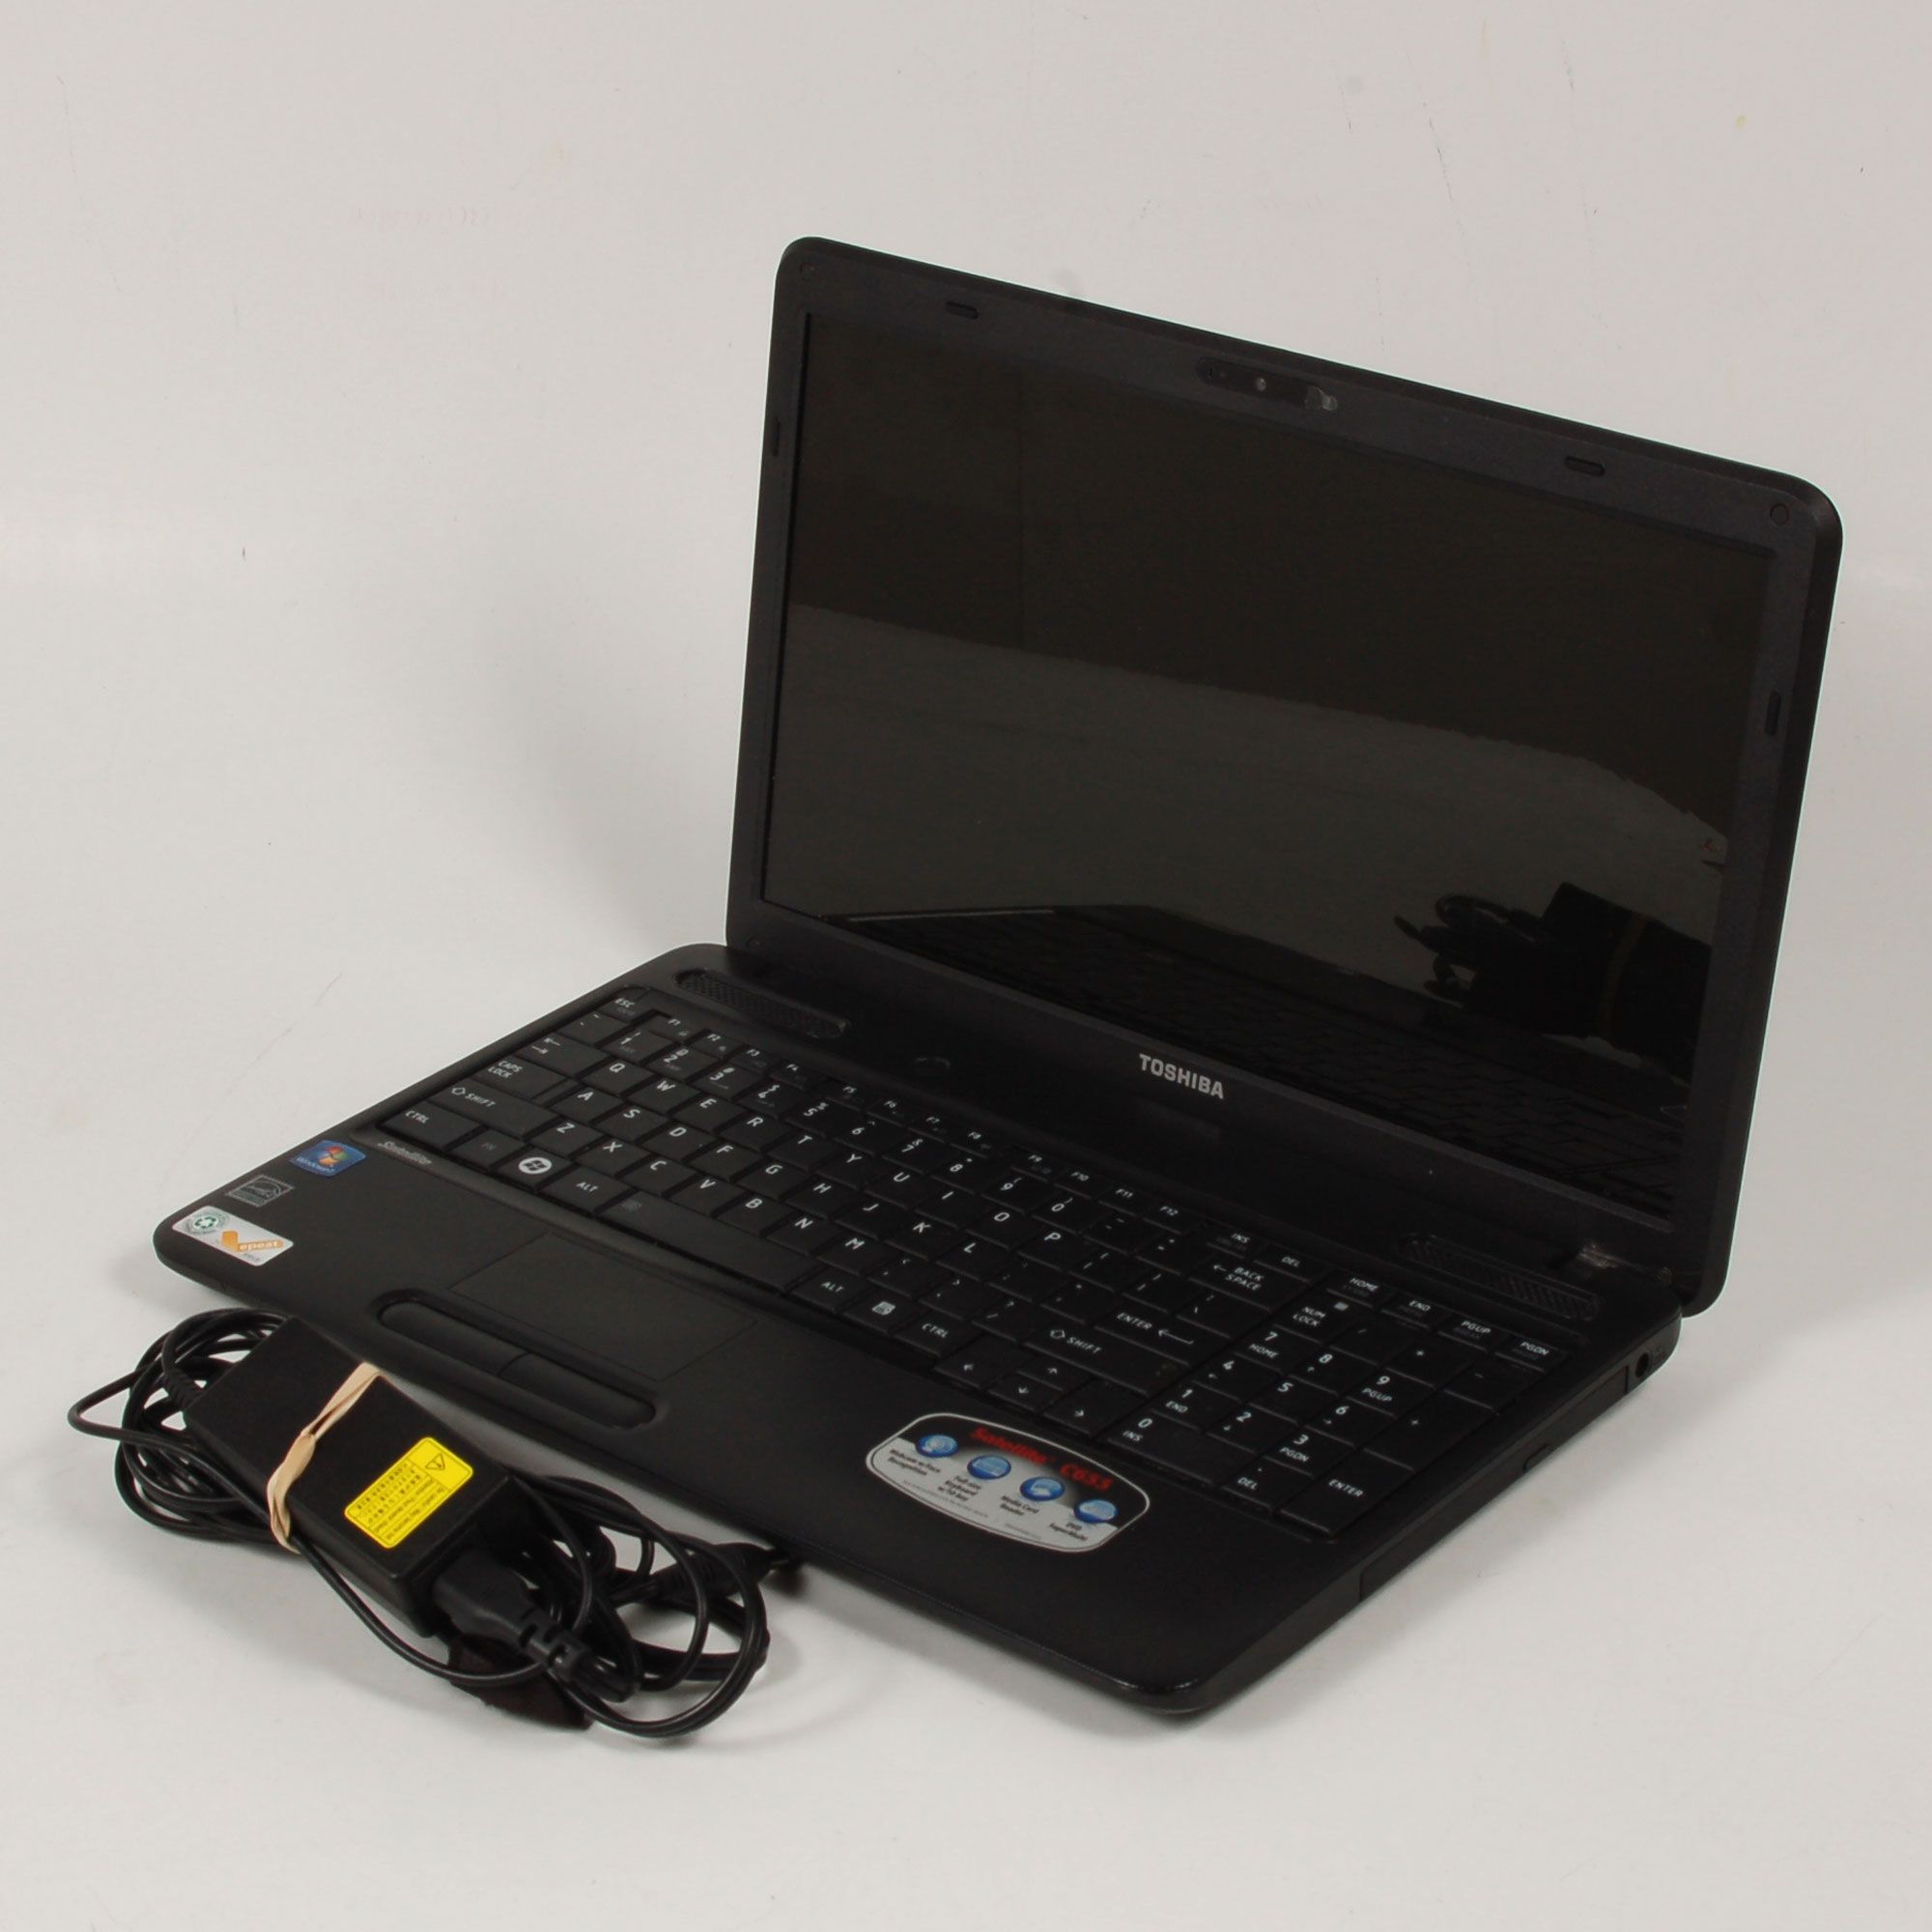 Here is a Toshiba Satellite C655 Laptop in used but good condition